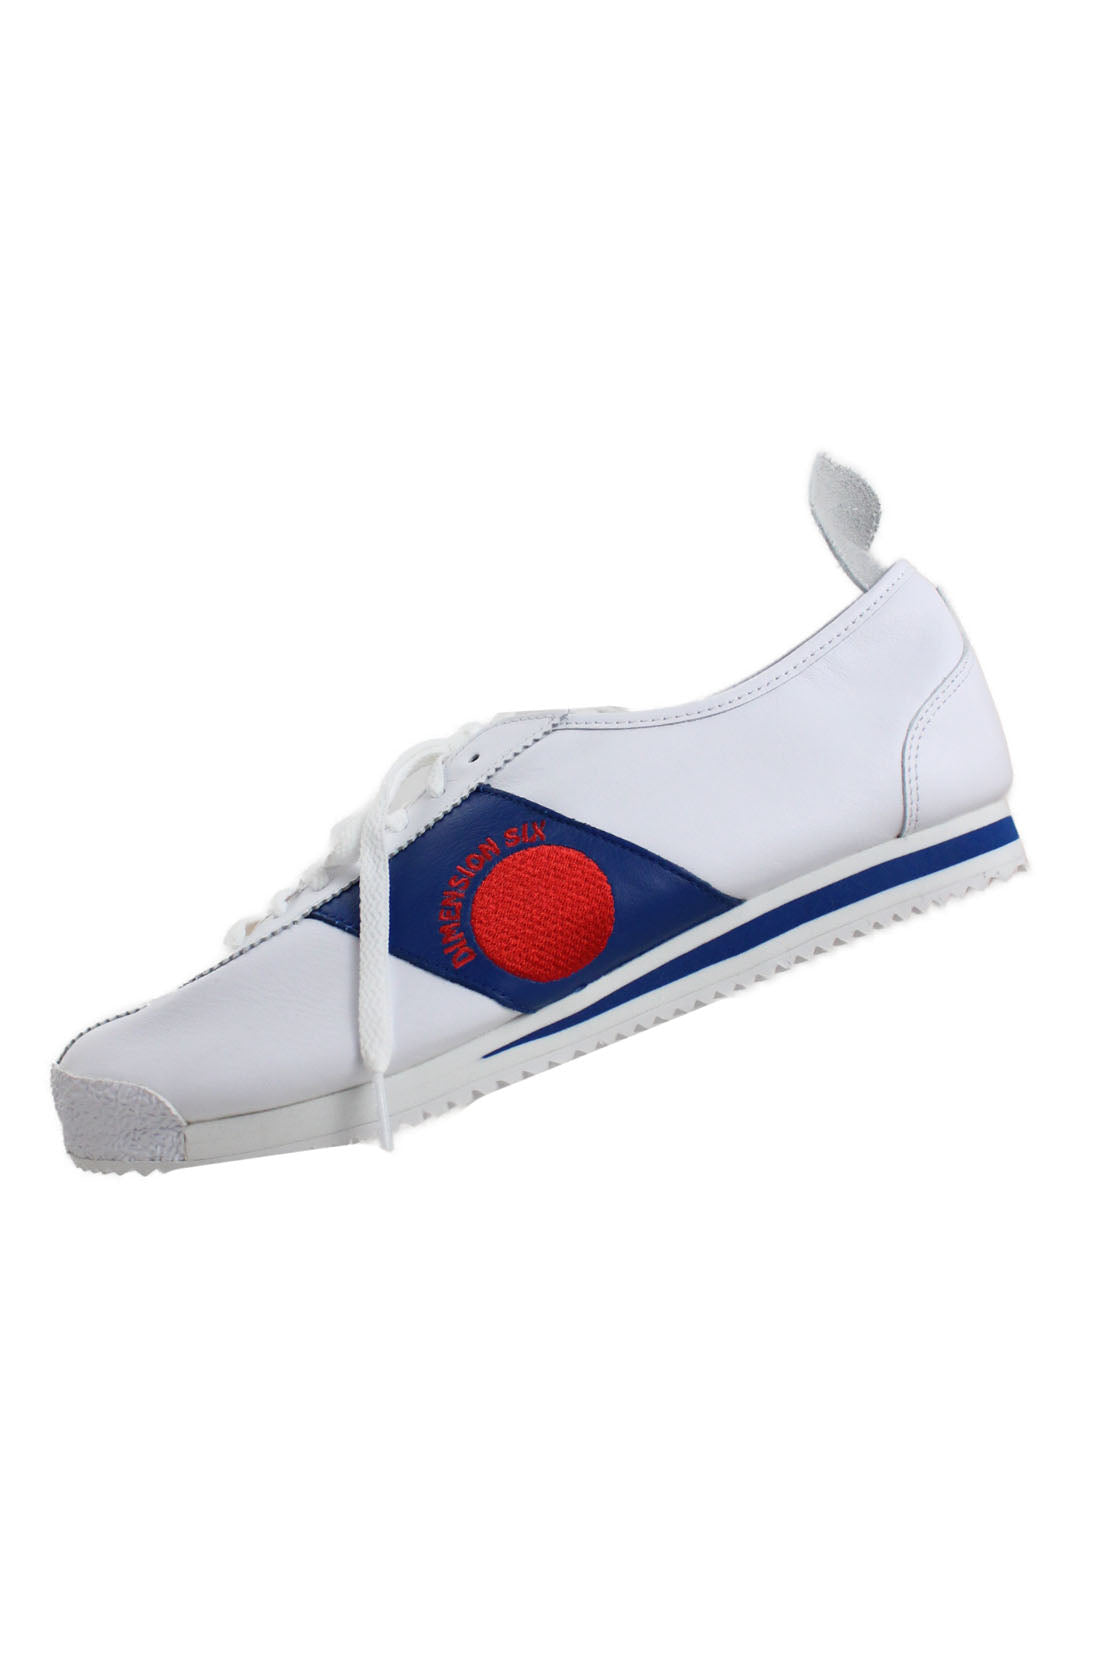 side view of nike x dimension six white/multi ‘cortez 72 shoe dog’ leather shoes. features ‘nike’ logo tags at tongue, ‘dimension six’ embroidered logo at outer sides, nike swoosh at inner sides, top flat lace closure, and heel tab flap.